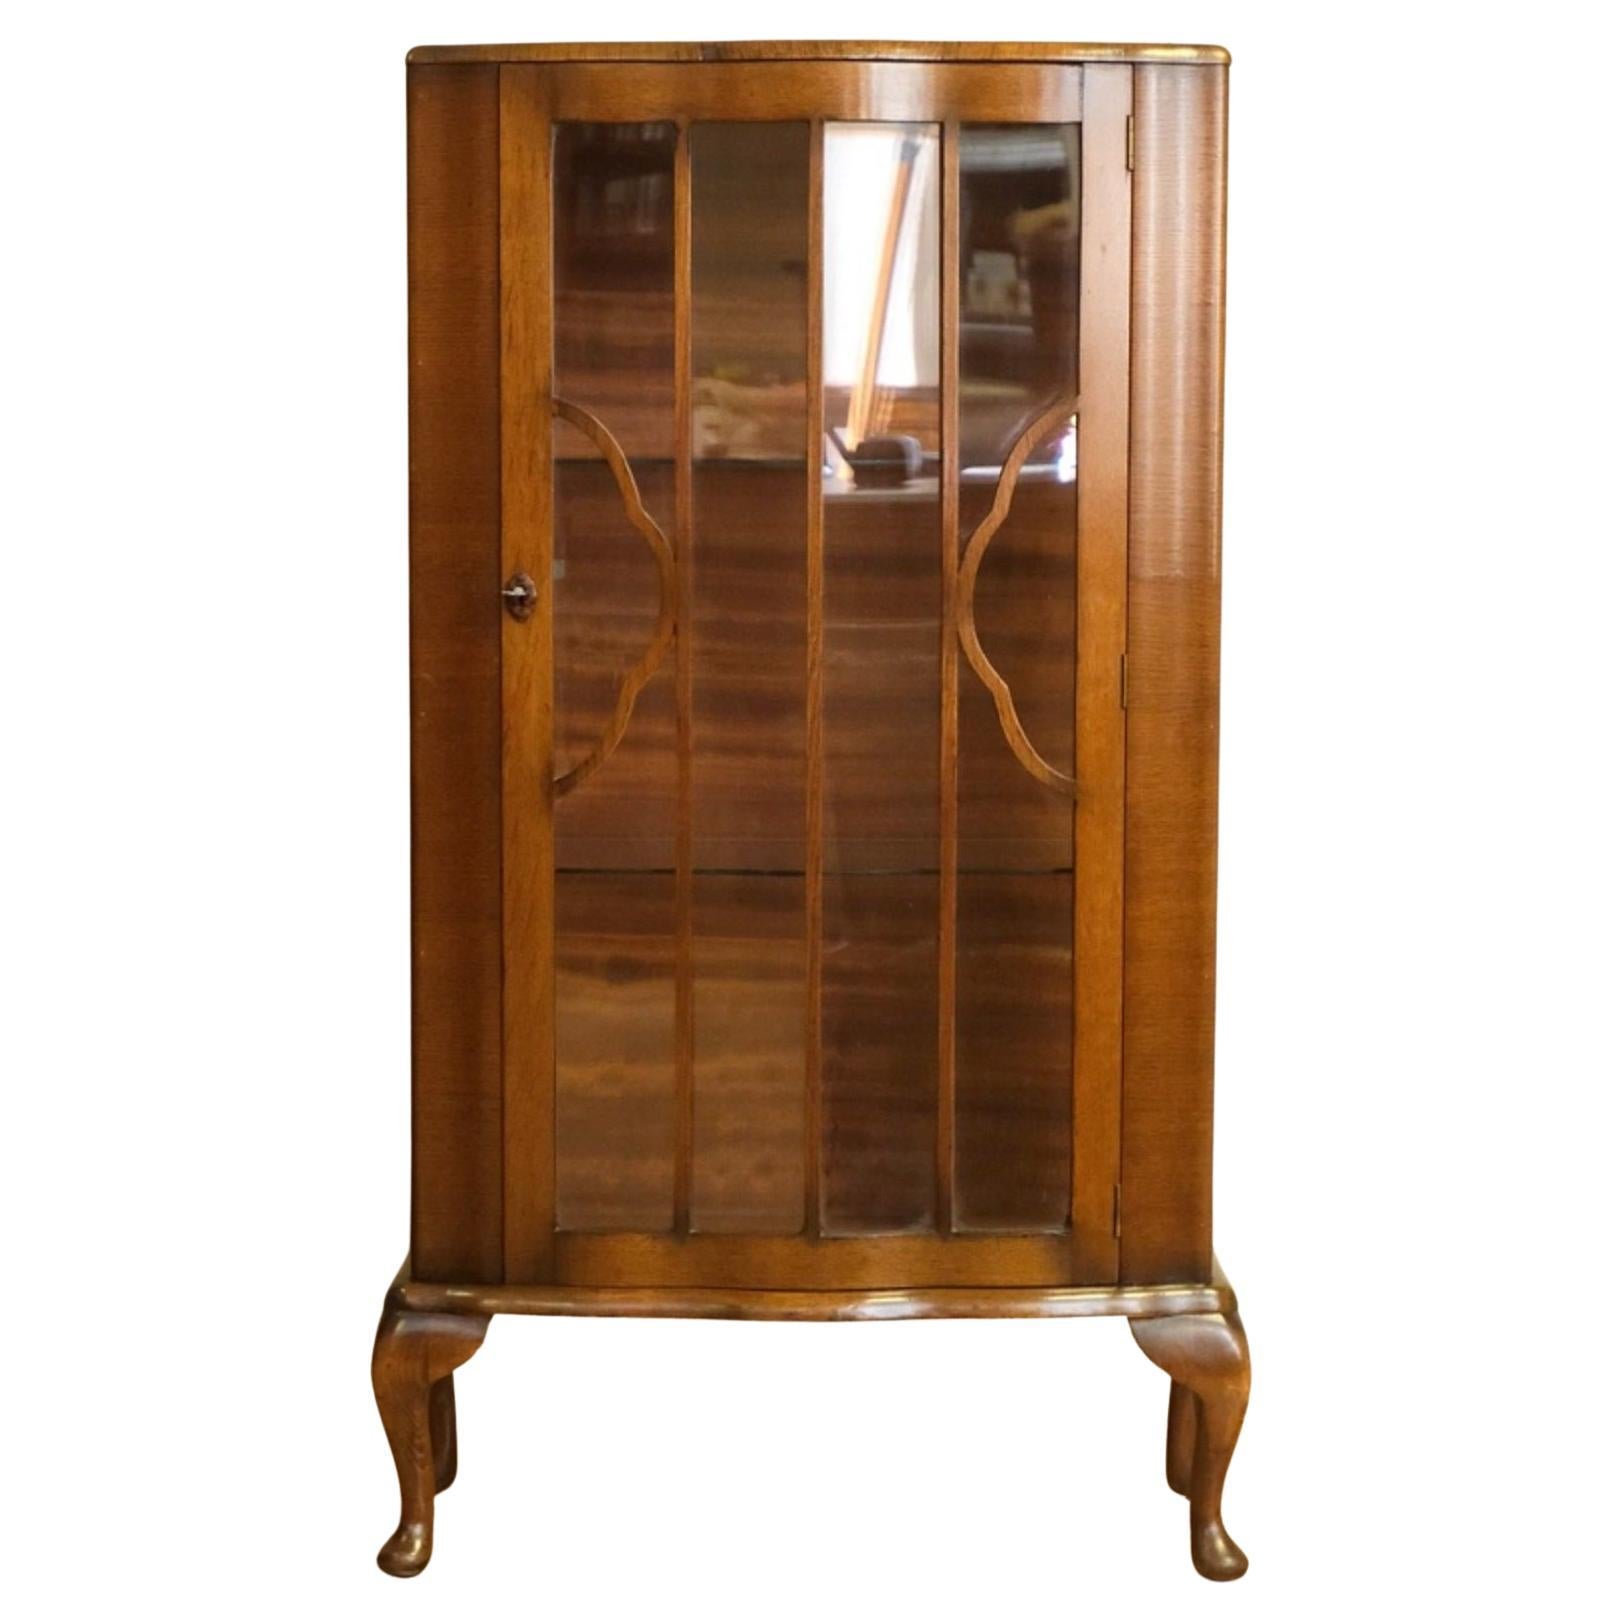 SMALL GORGEOUS WALNUT GLAZED BOOKCASE WiTH GLASS SHELVES ON QUEEN ANN STYLE LEGS For Sale